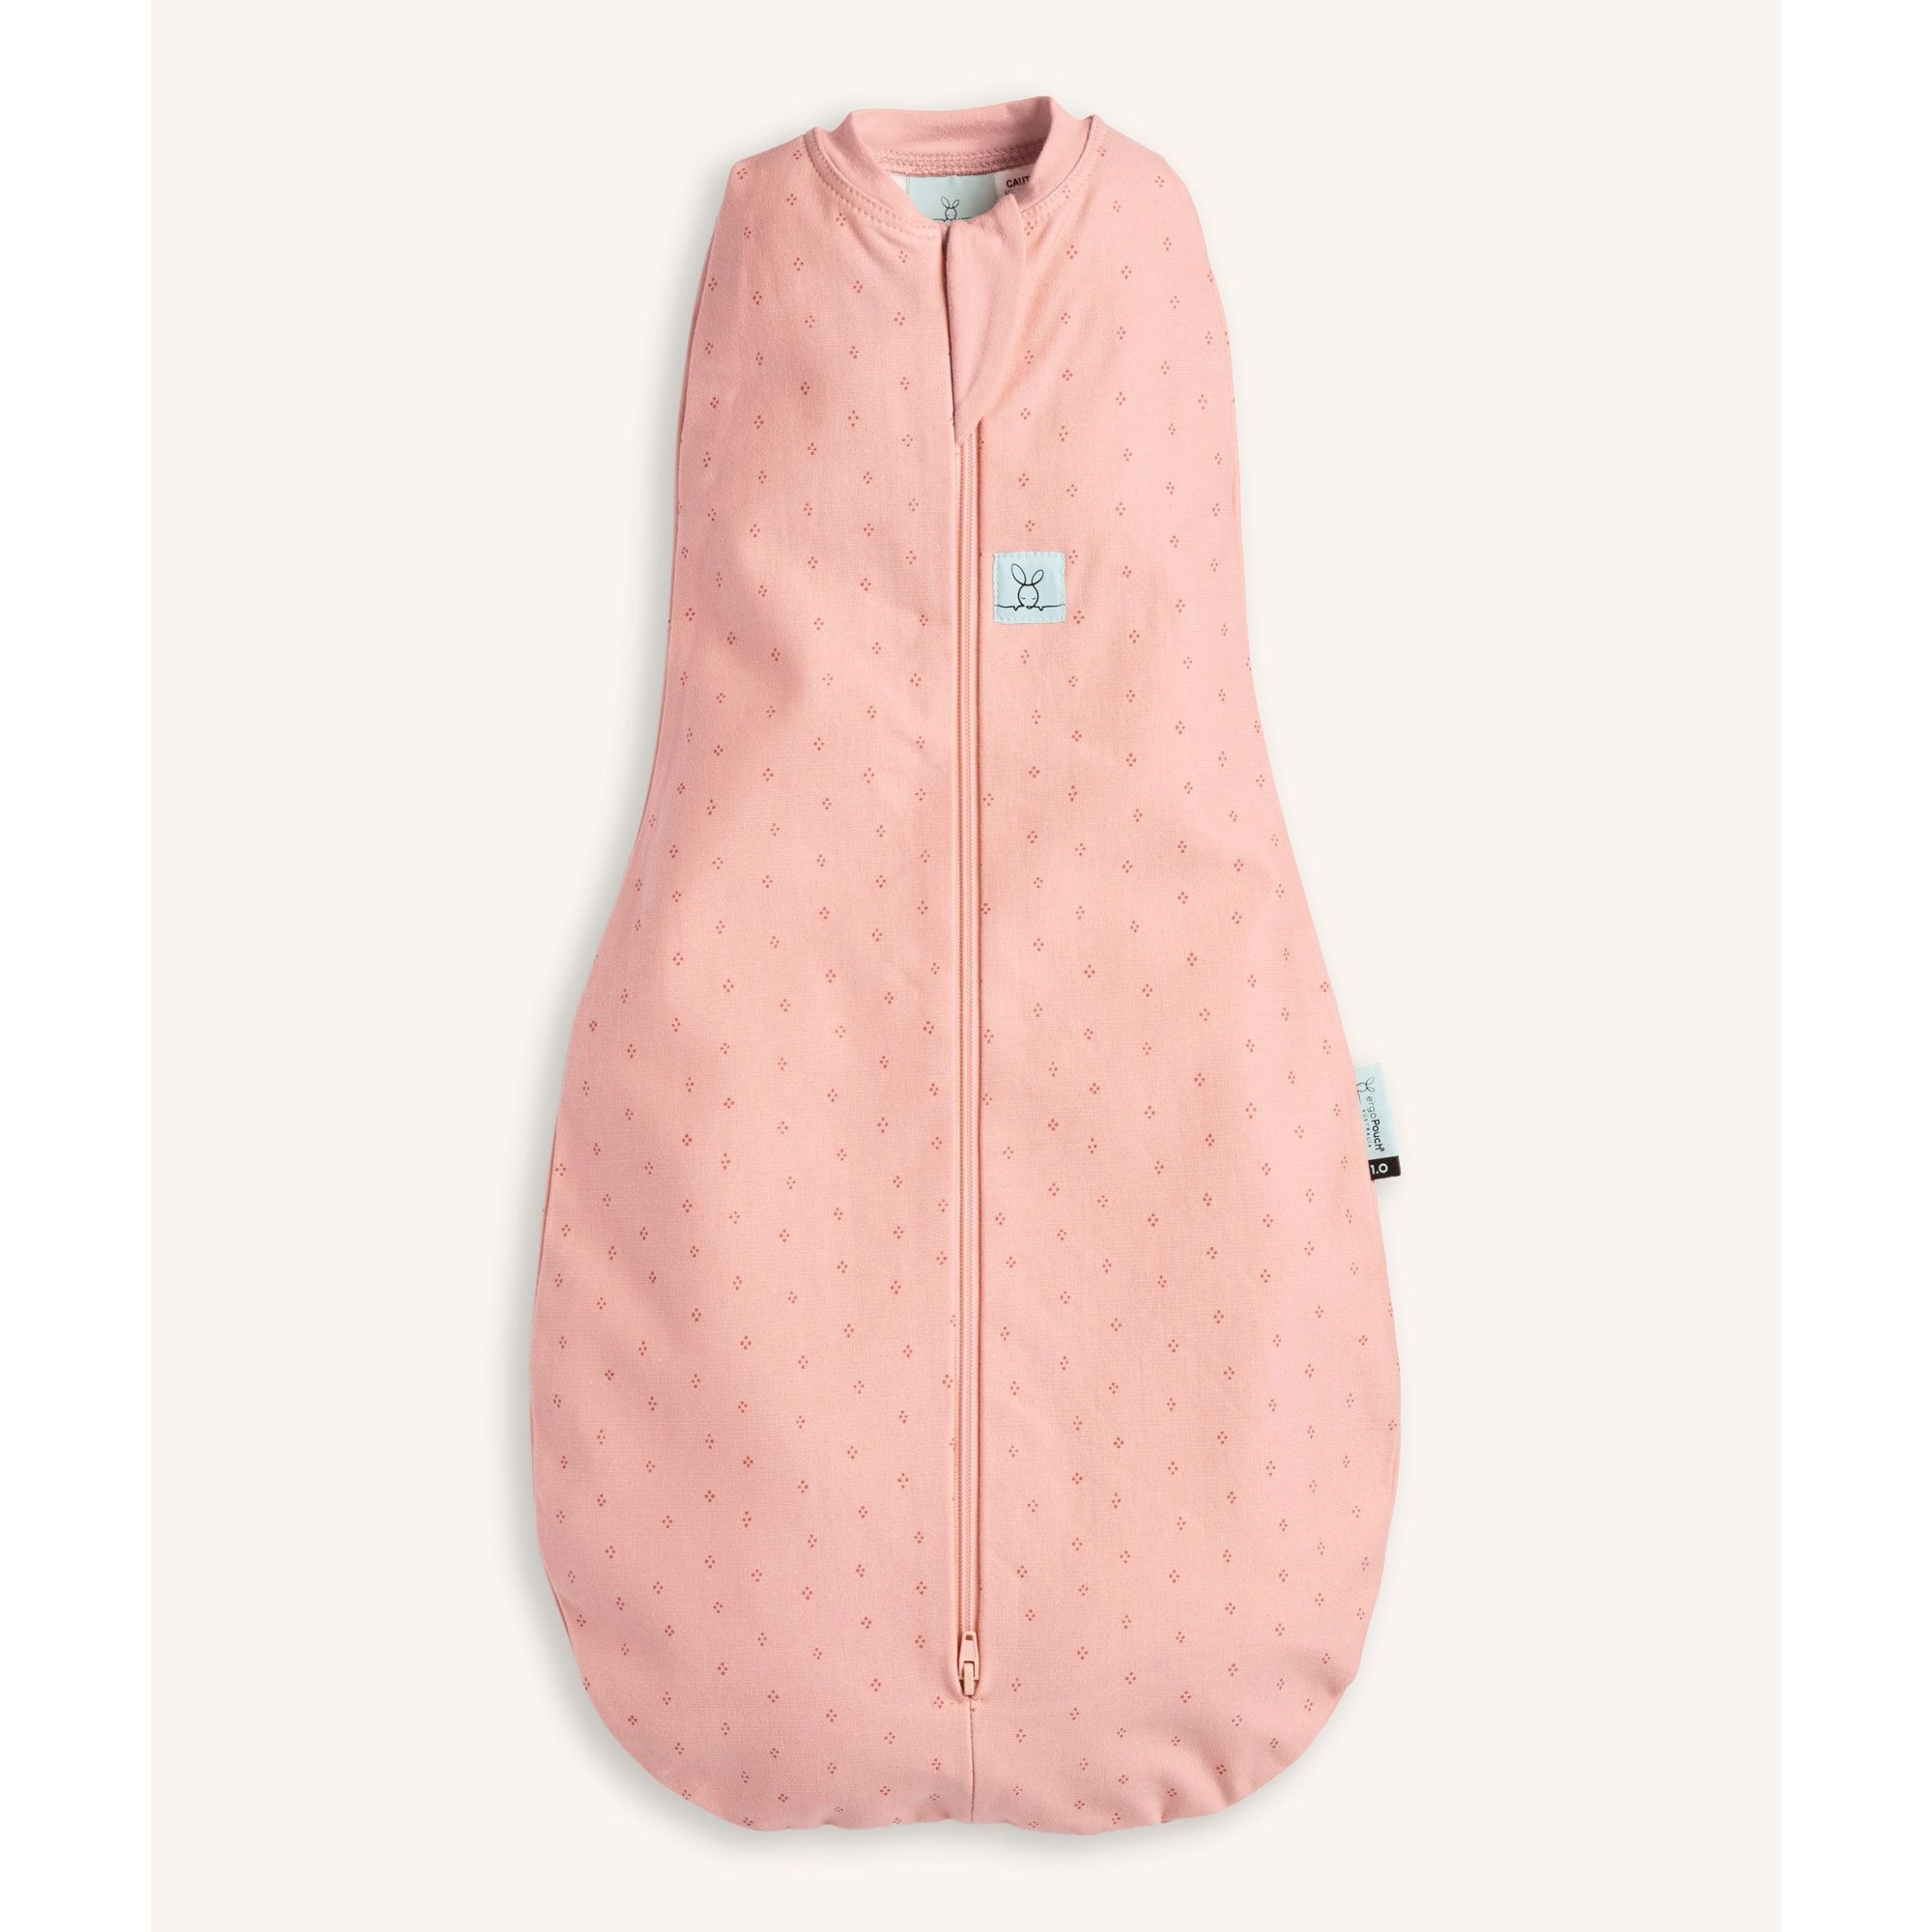 ergoPouch Cocoon Organic Zip Up Swaddle Bag - Berries 0.2 TOG